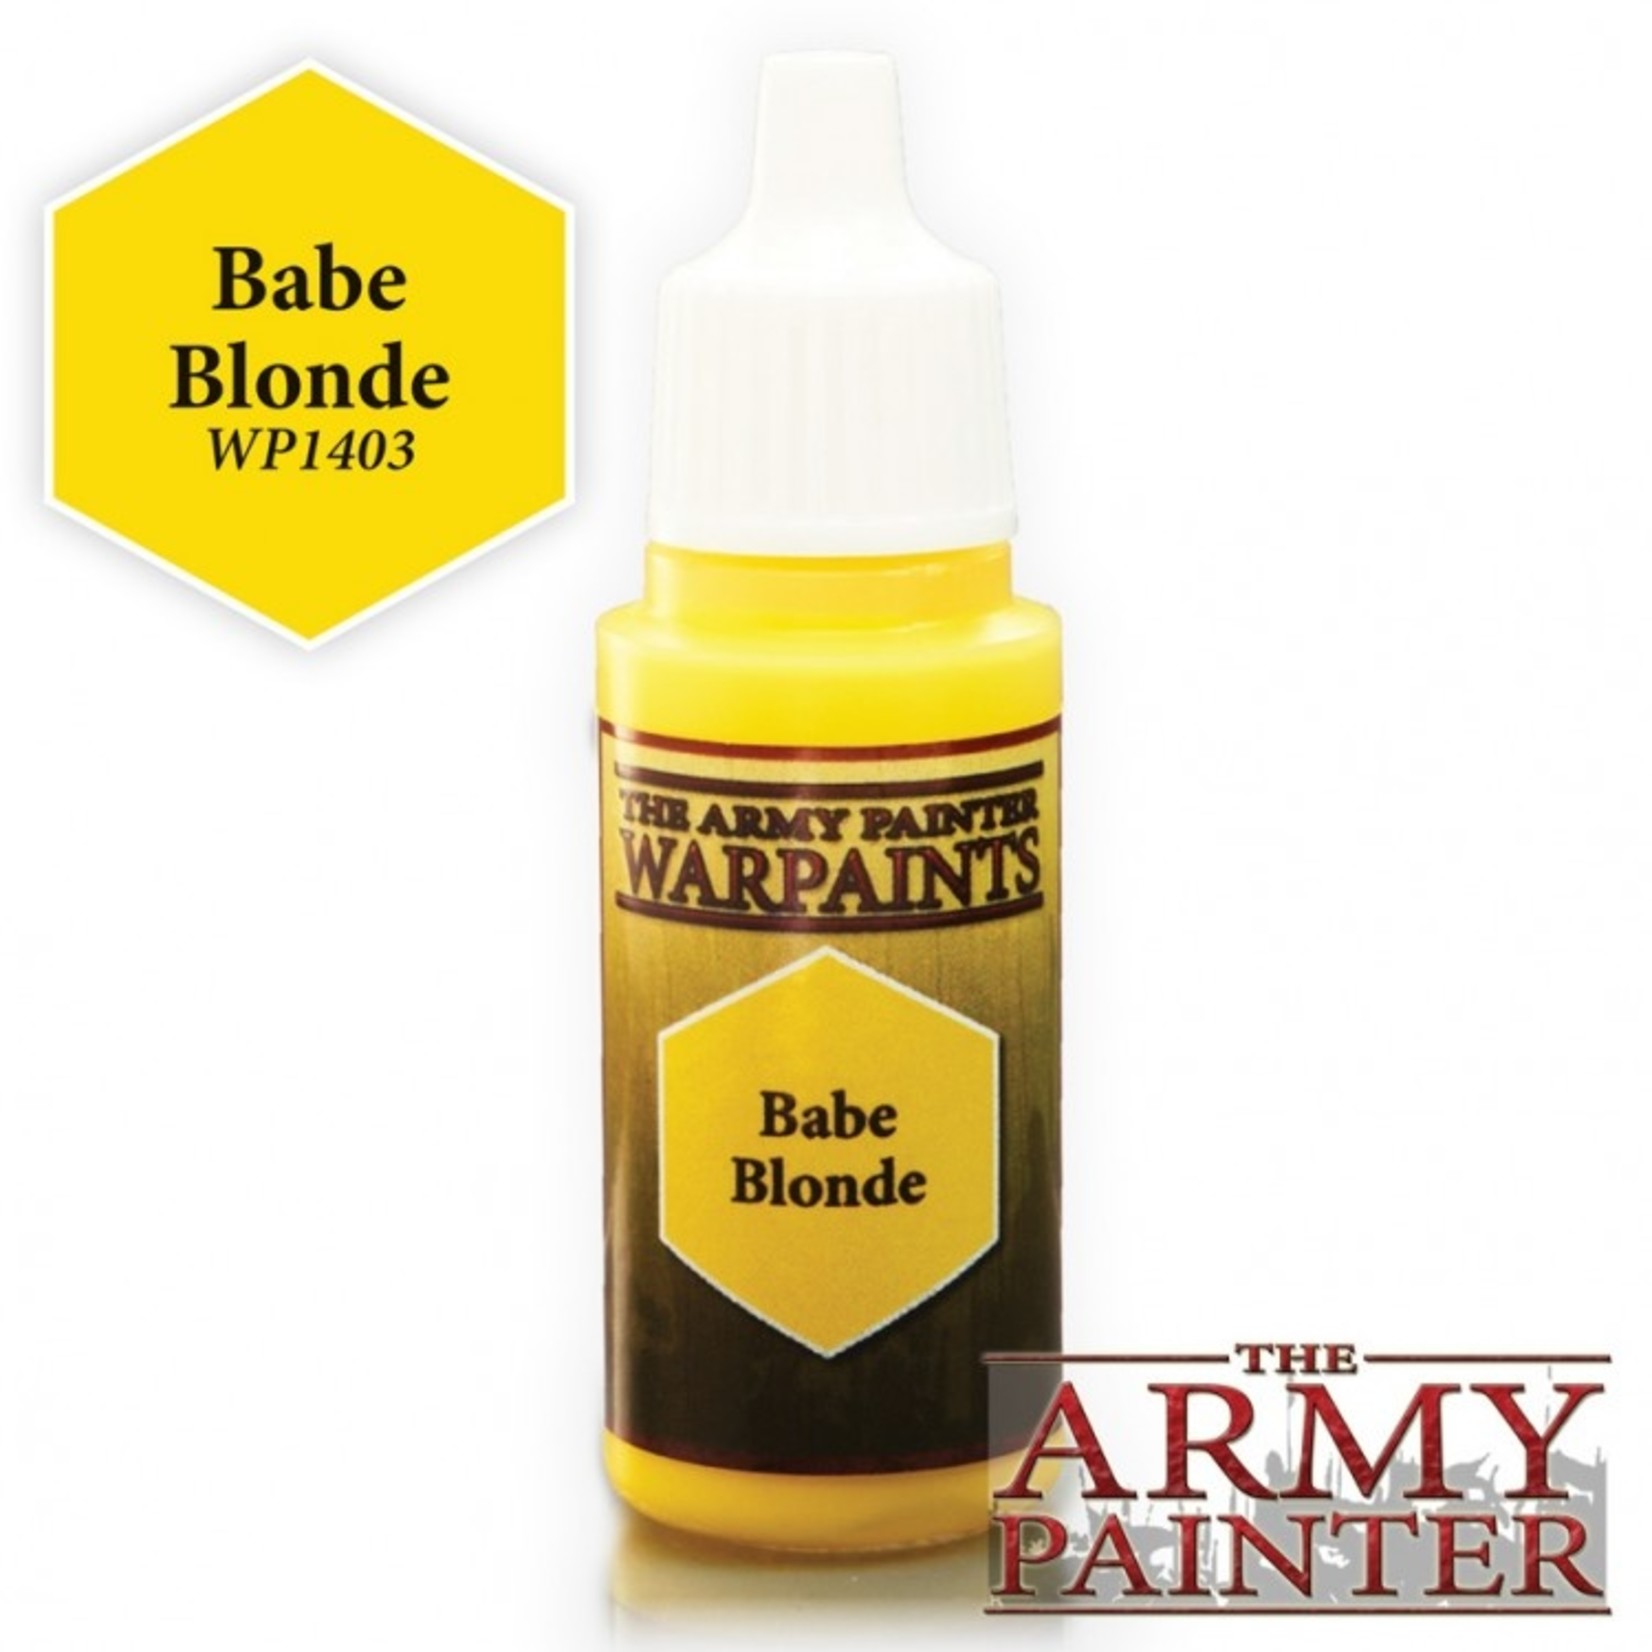 The Army Painter The Army Painter Babe Blonde 18ml